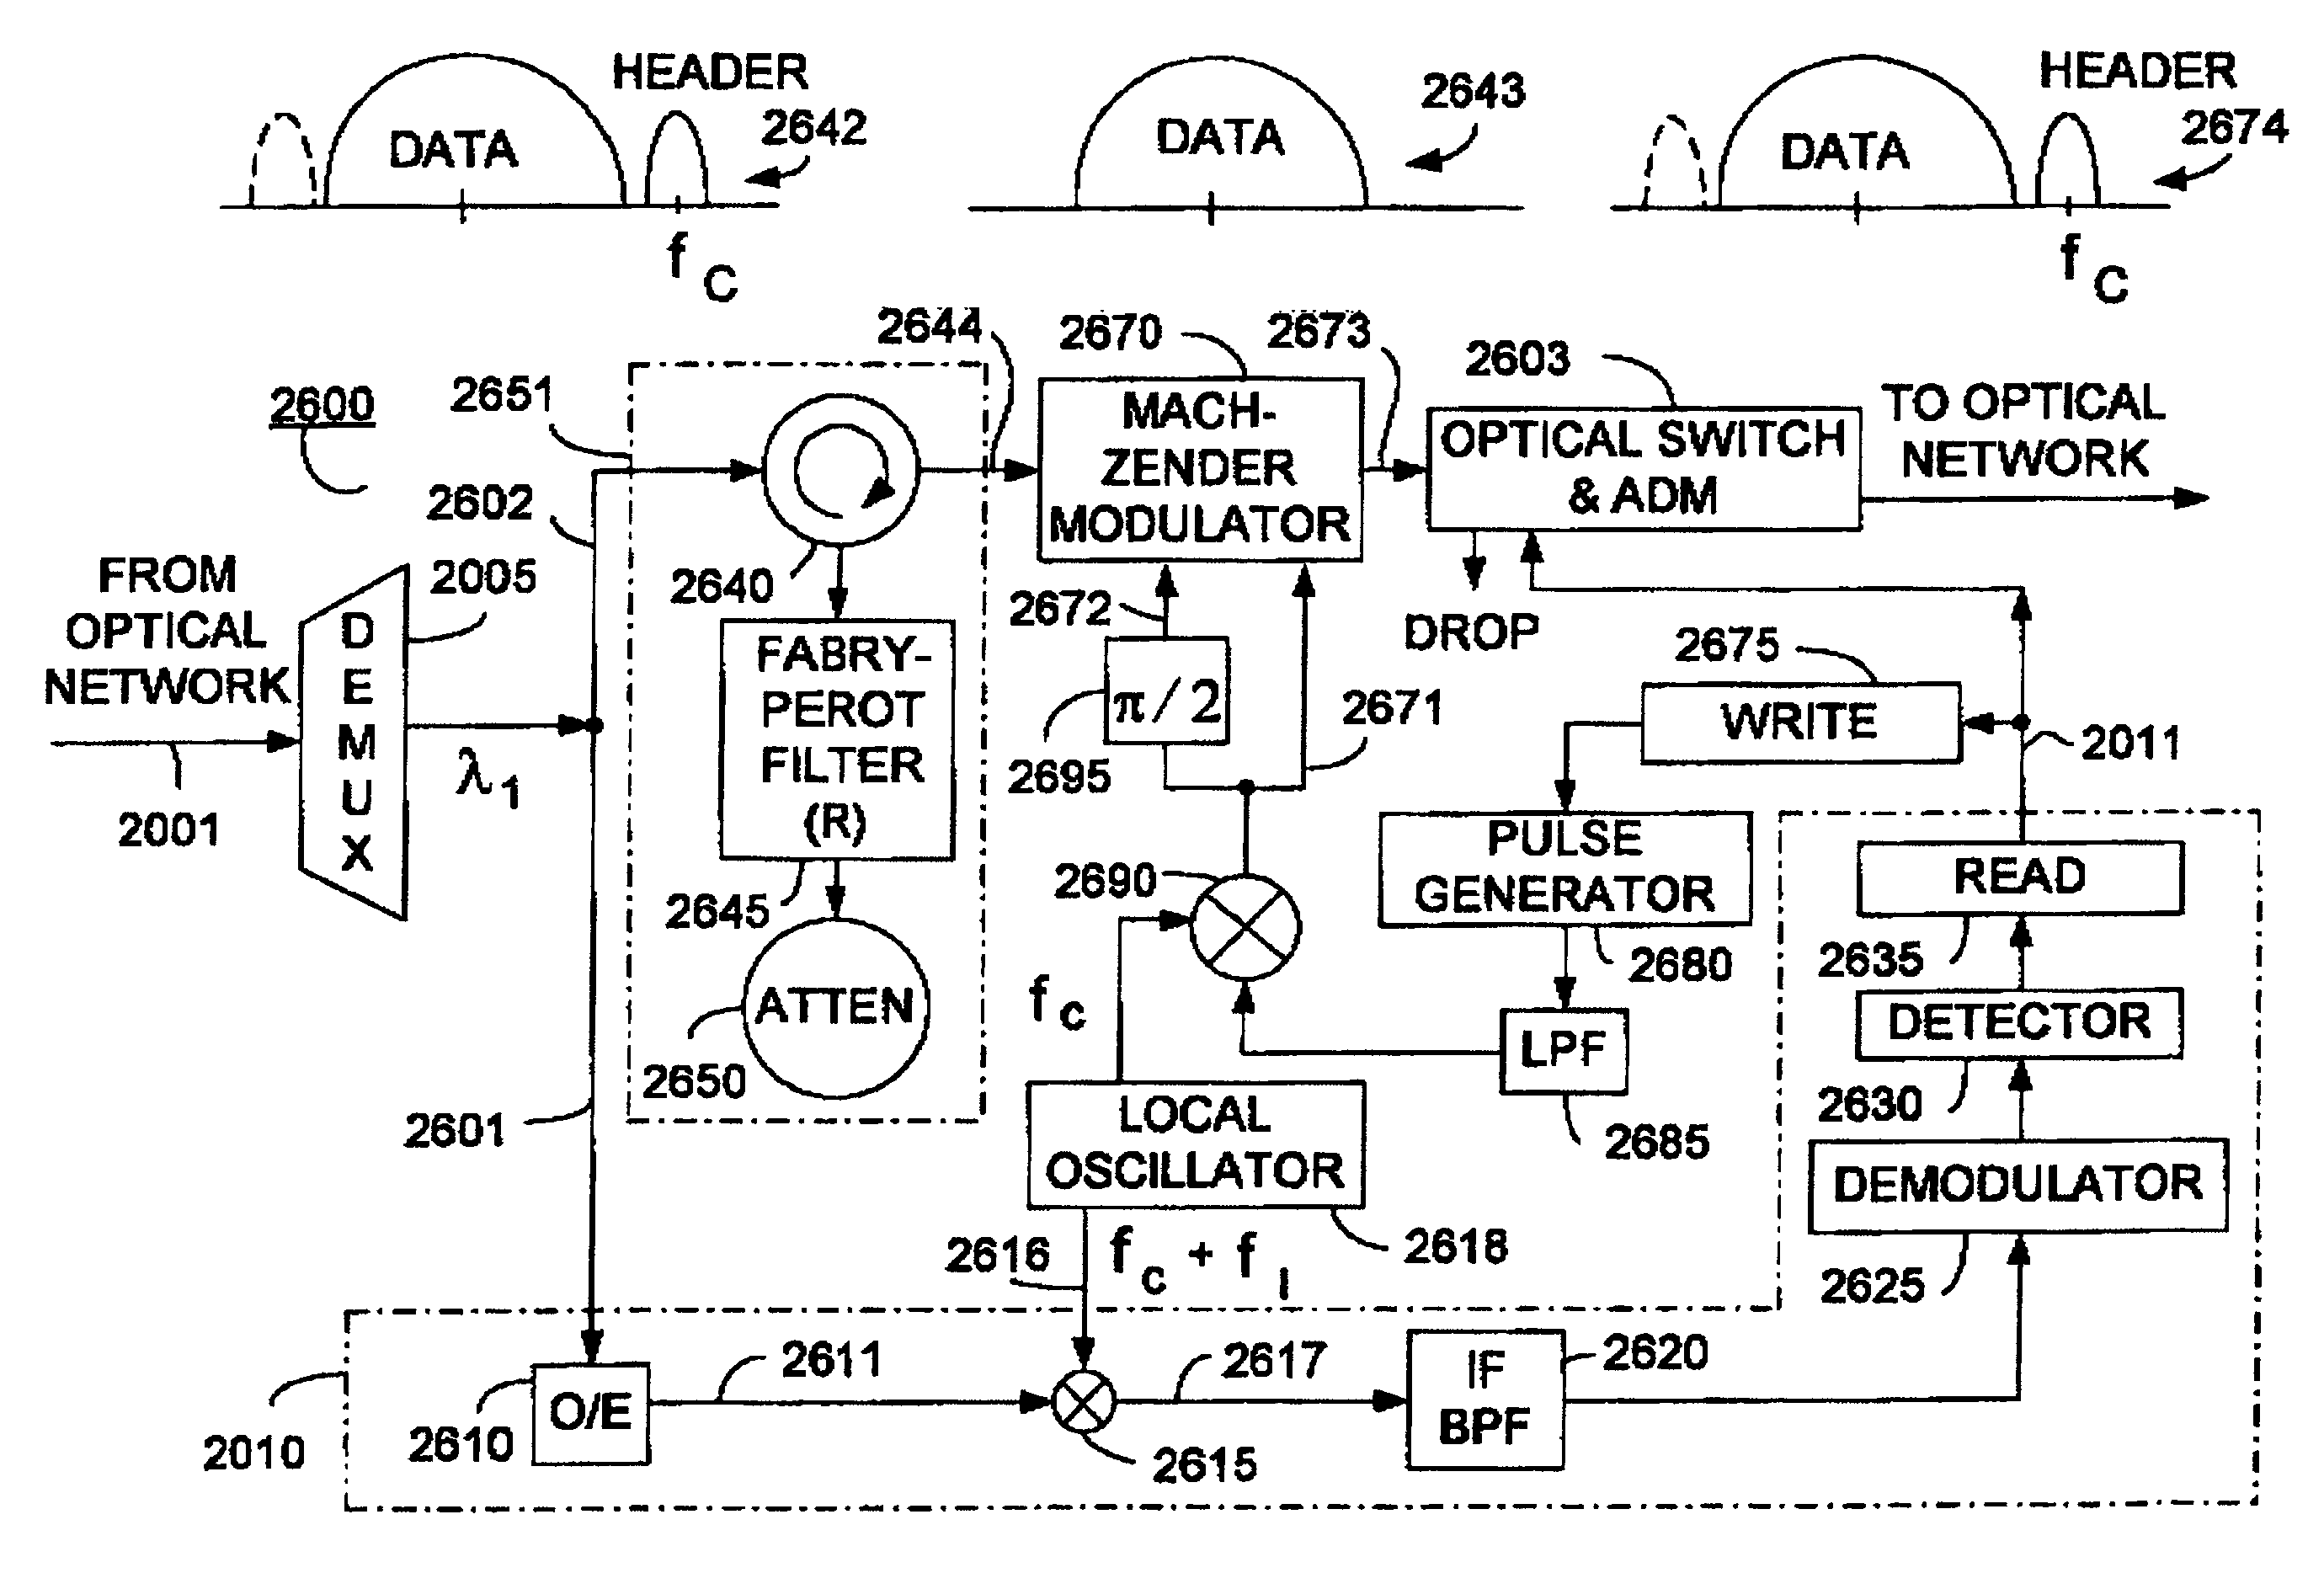 Optical layer multicasting using a multiple sub-carrier header and a multicast switch with active header insertion via reflective single sideband optical processing